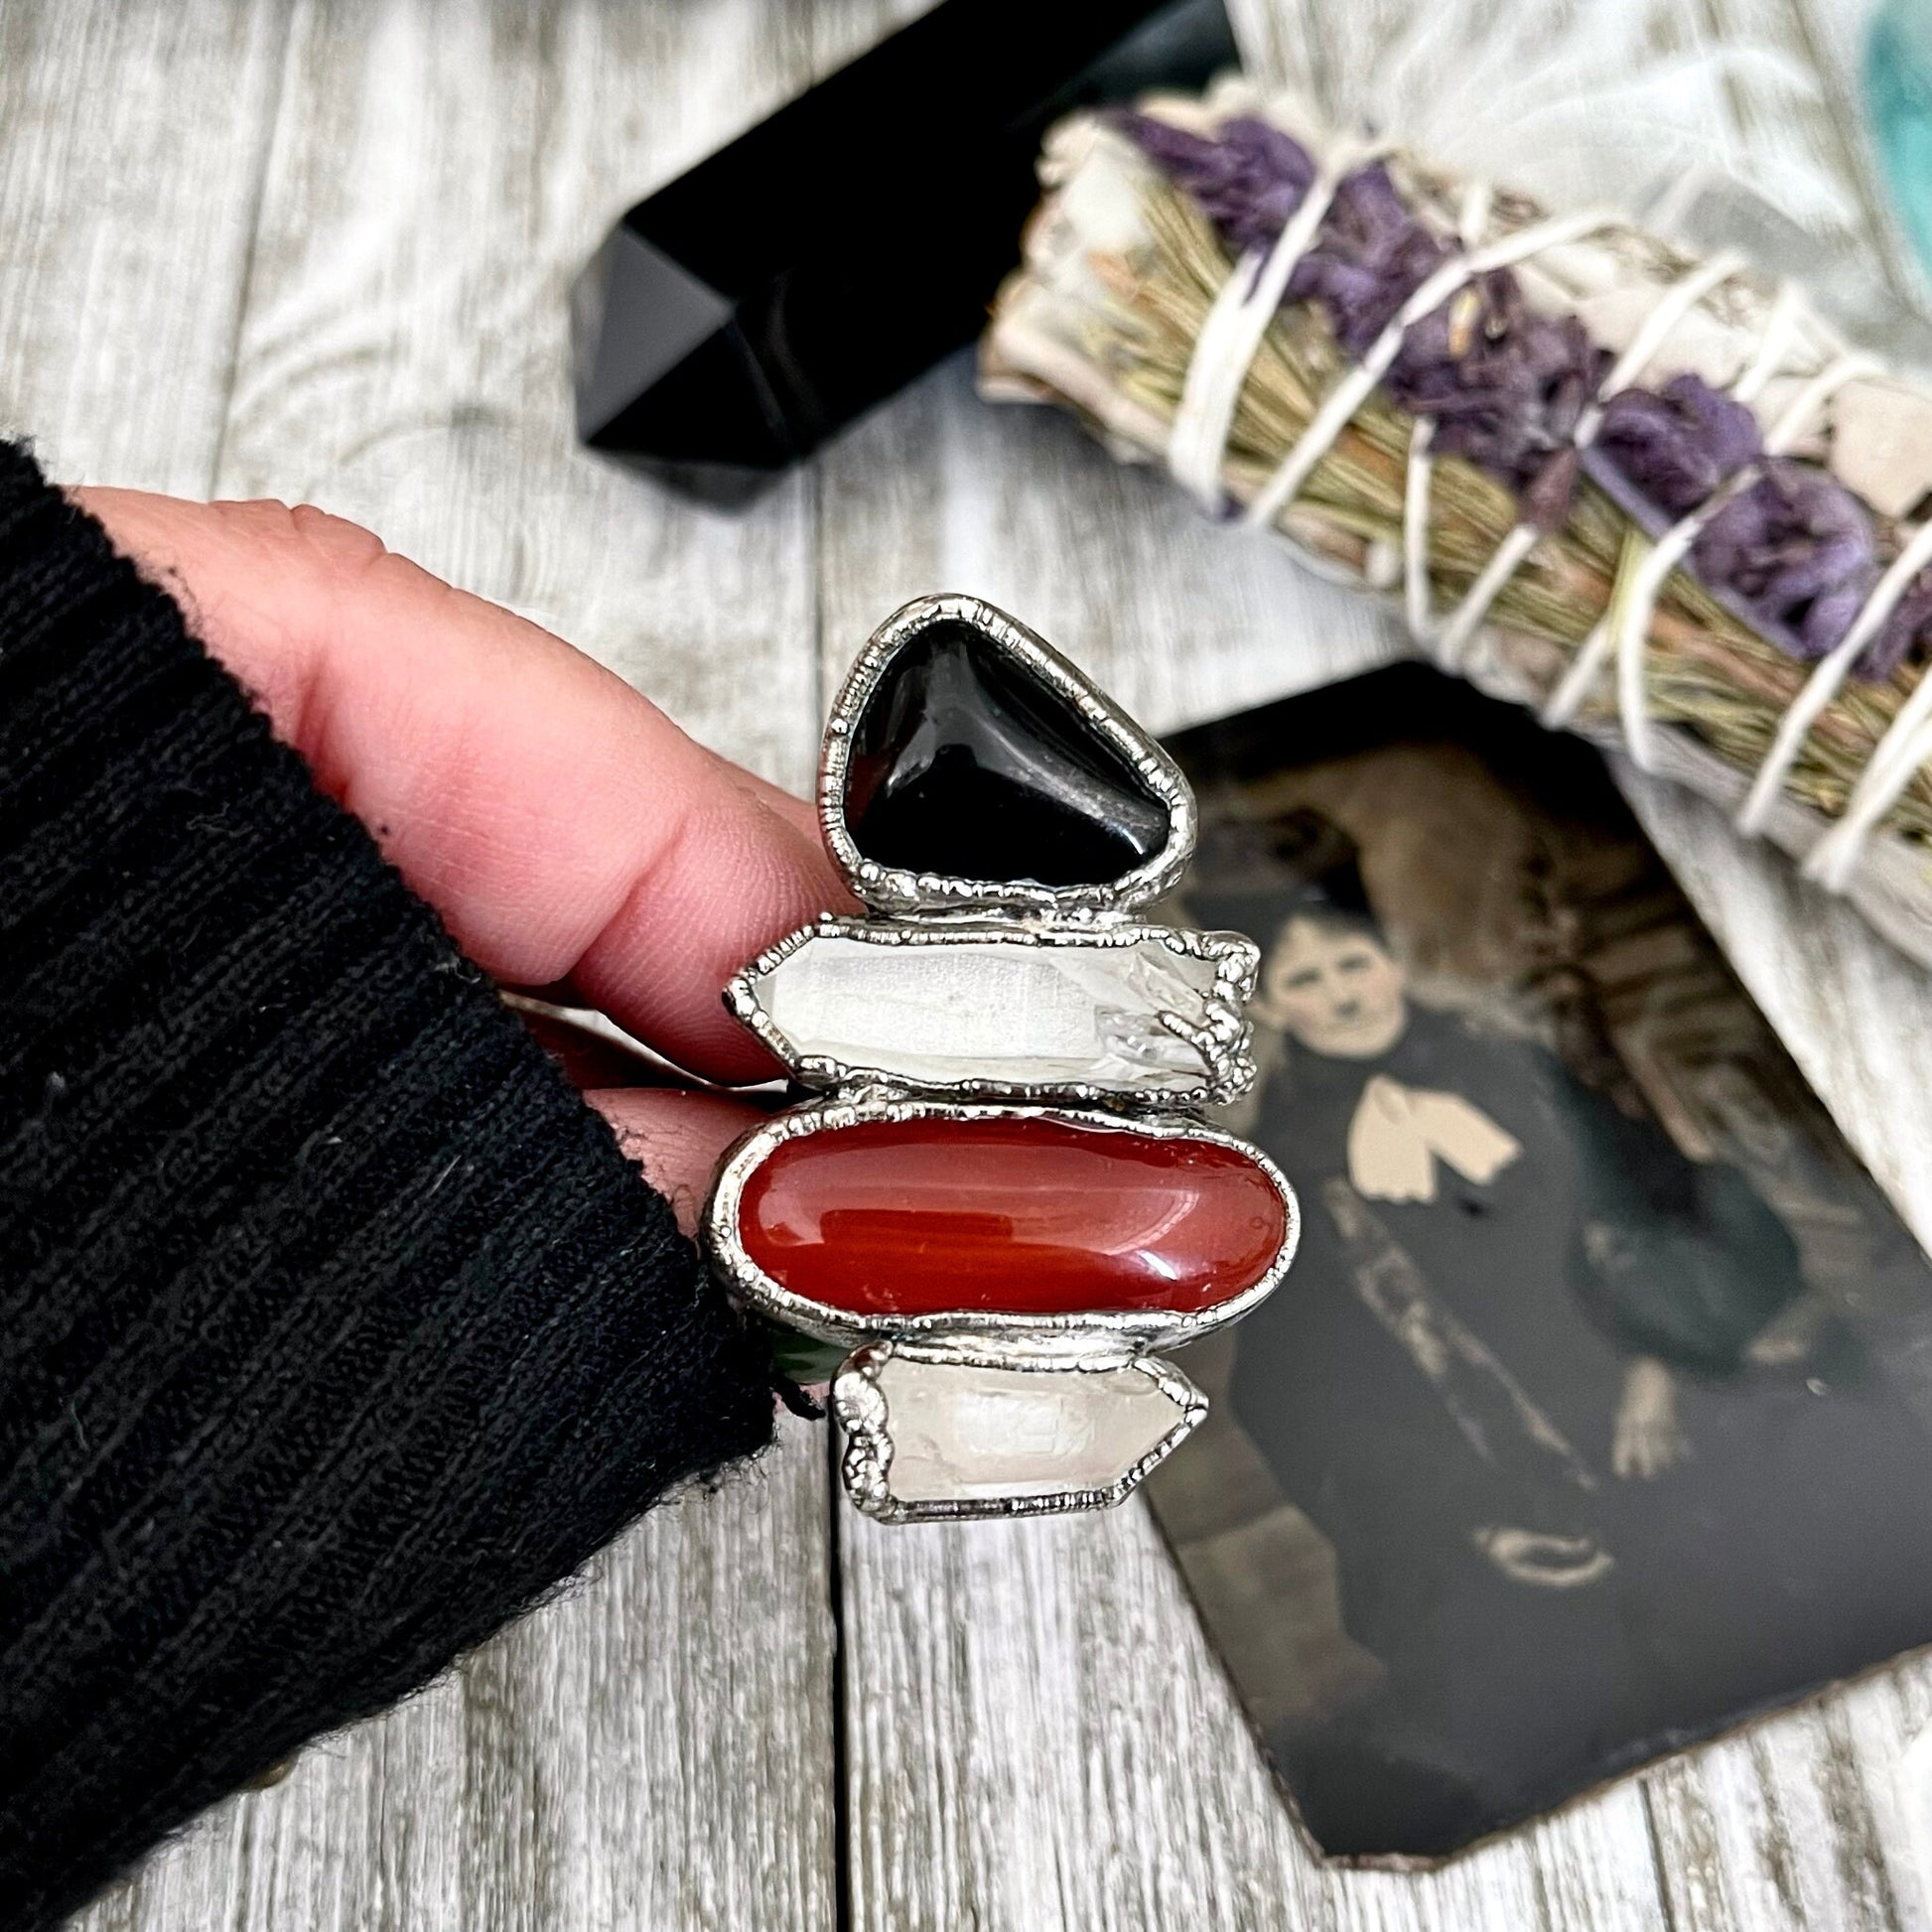 Size 10 Crystal Ring - Four Stone Black Onyx Red Carnelian Clear Quartz Ring In Silver / Foxlark - One of a Kind // Alternative Ring